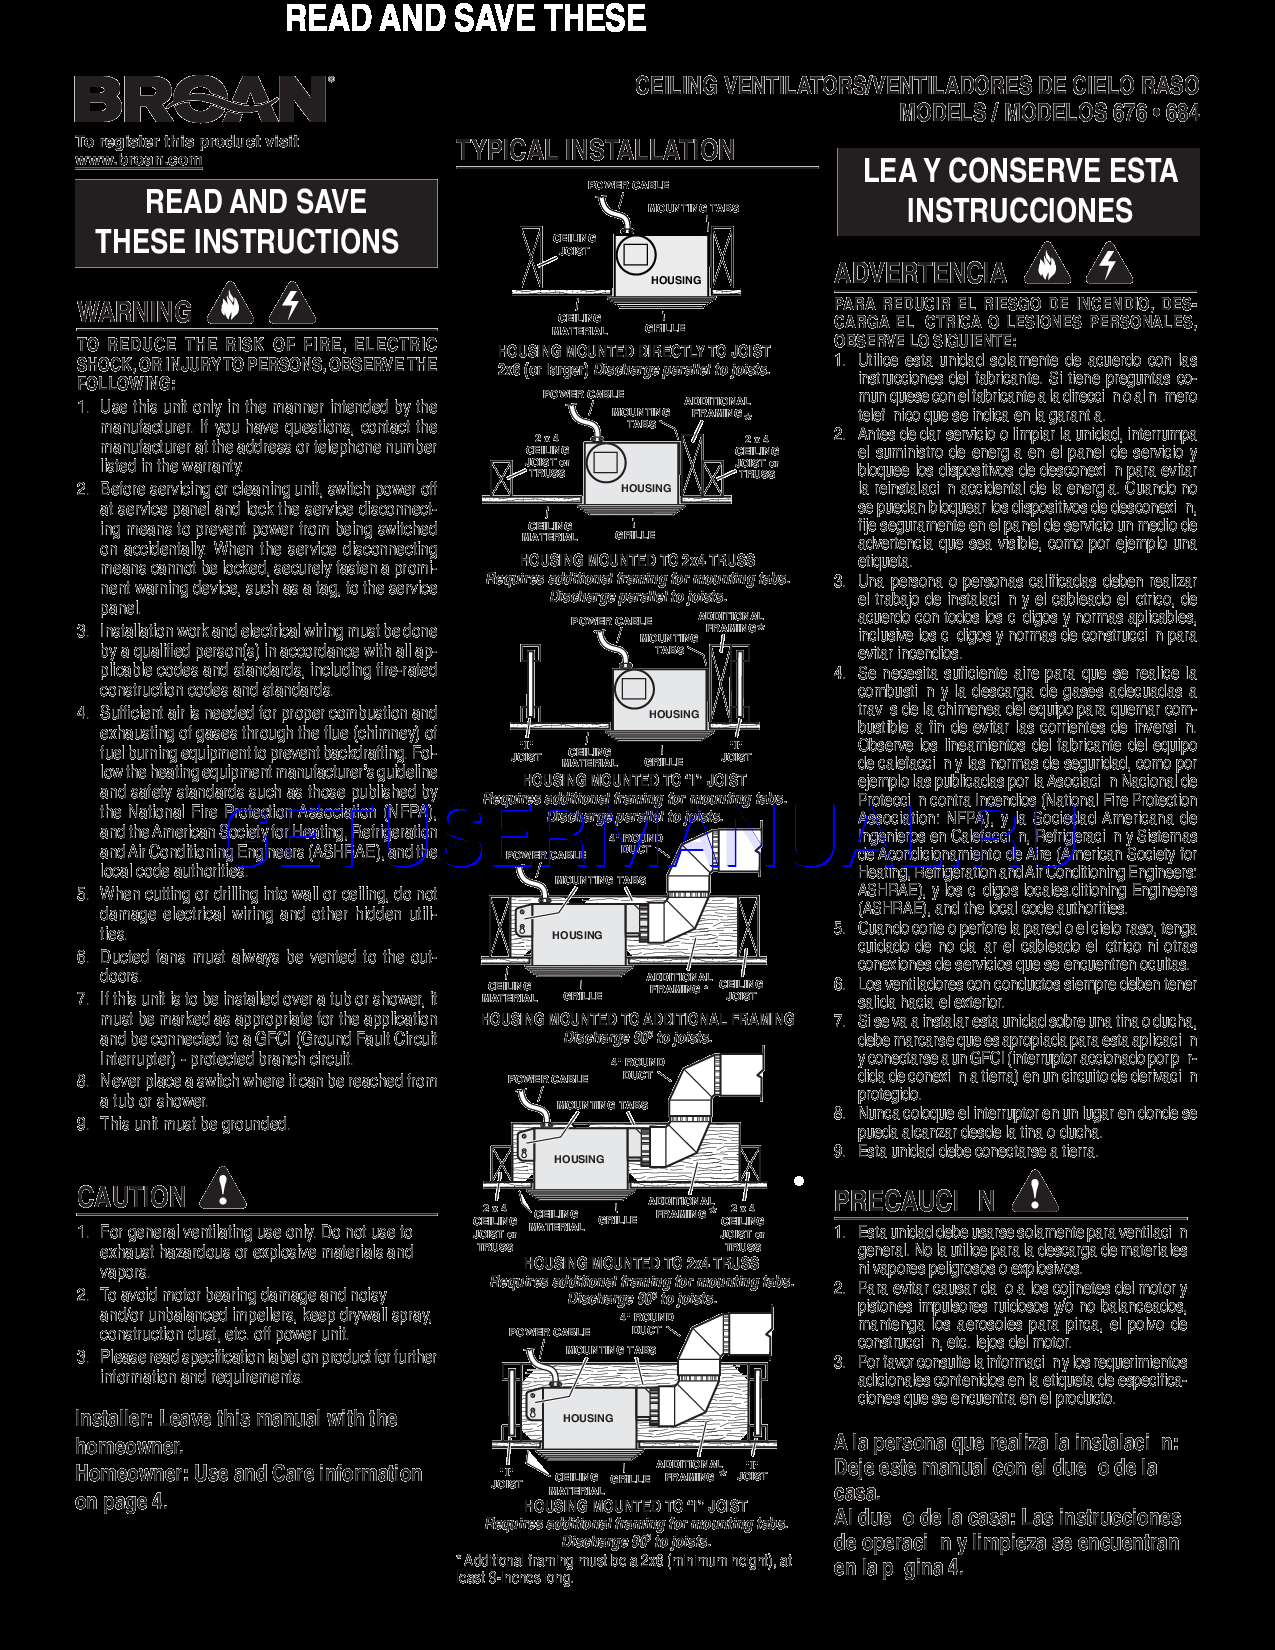 Broan Fans 676 Users Manual Download Free inside sizing 1275 X 1650